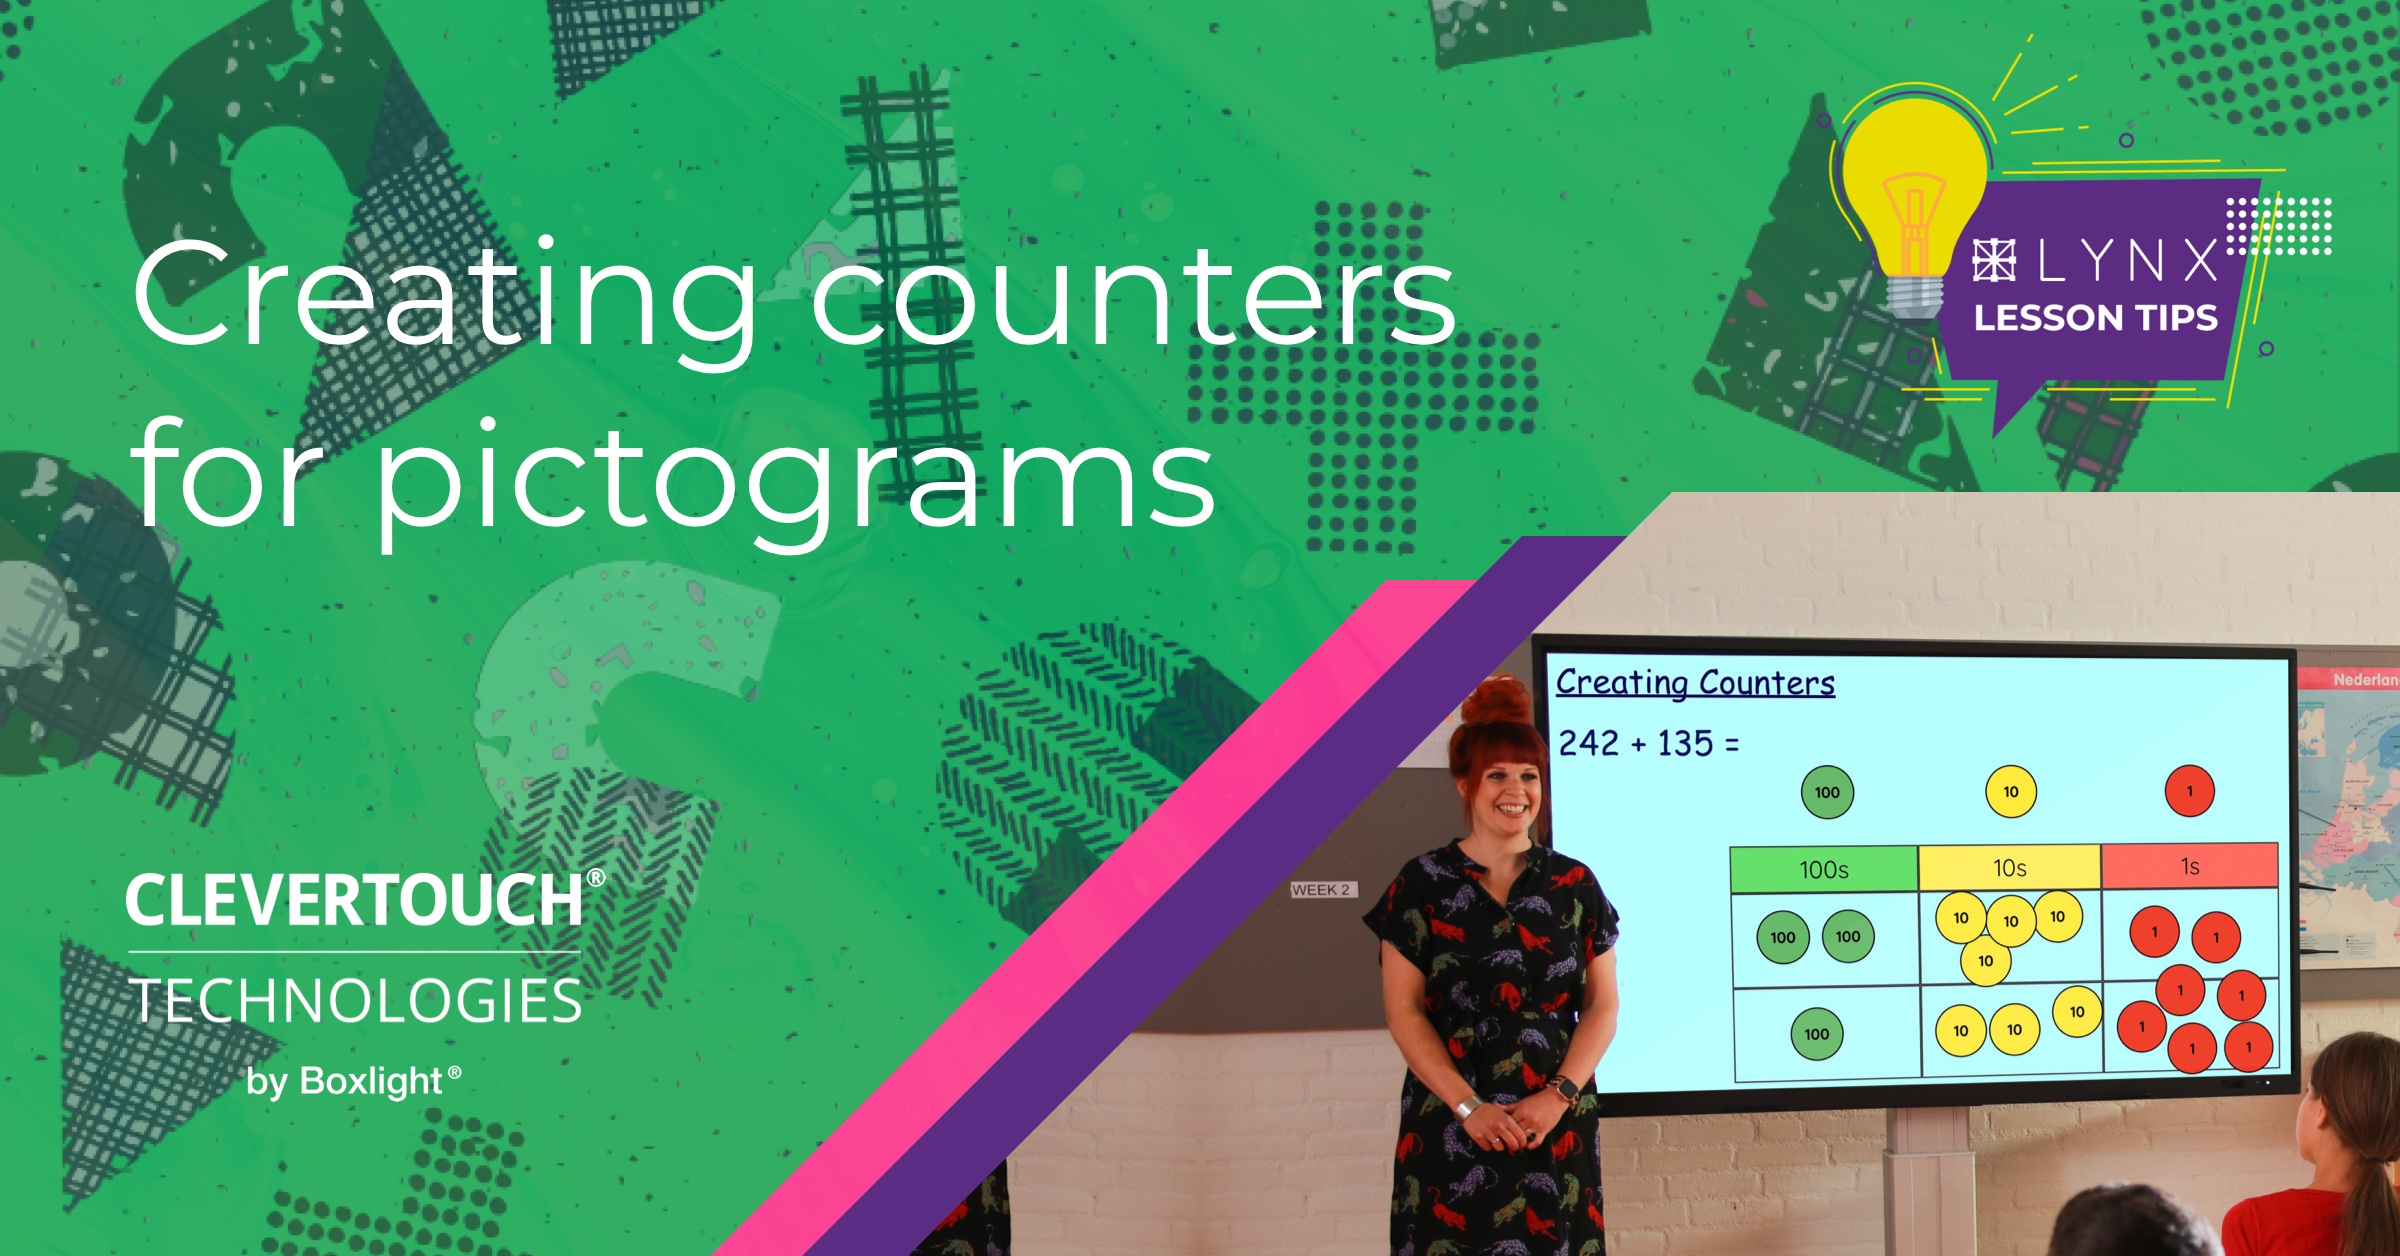 LYNX Tip 6: Creating counters